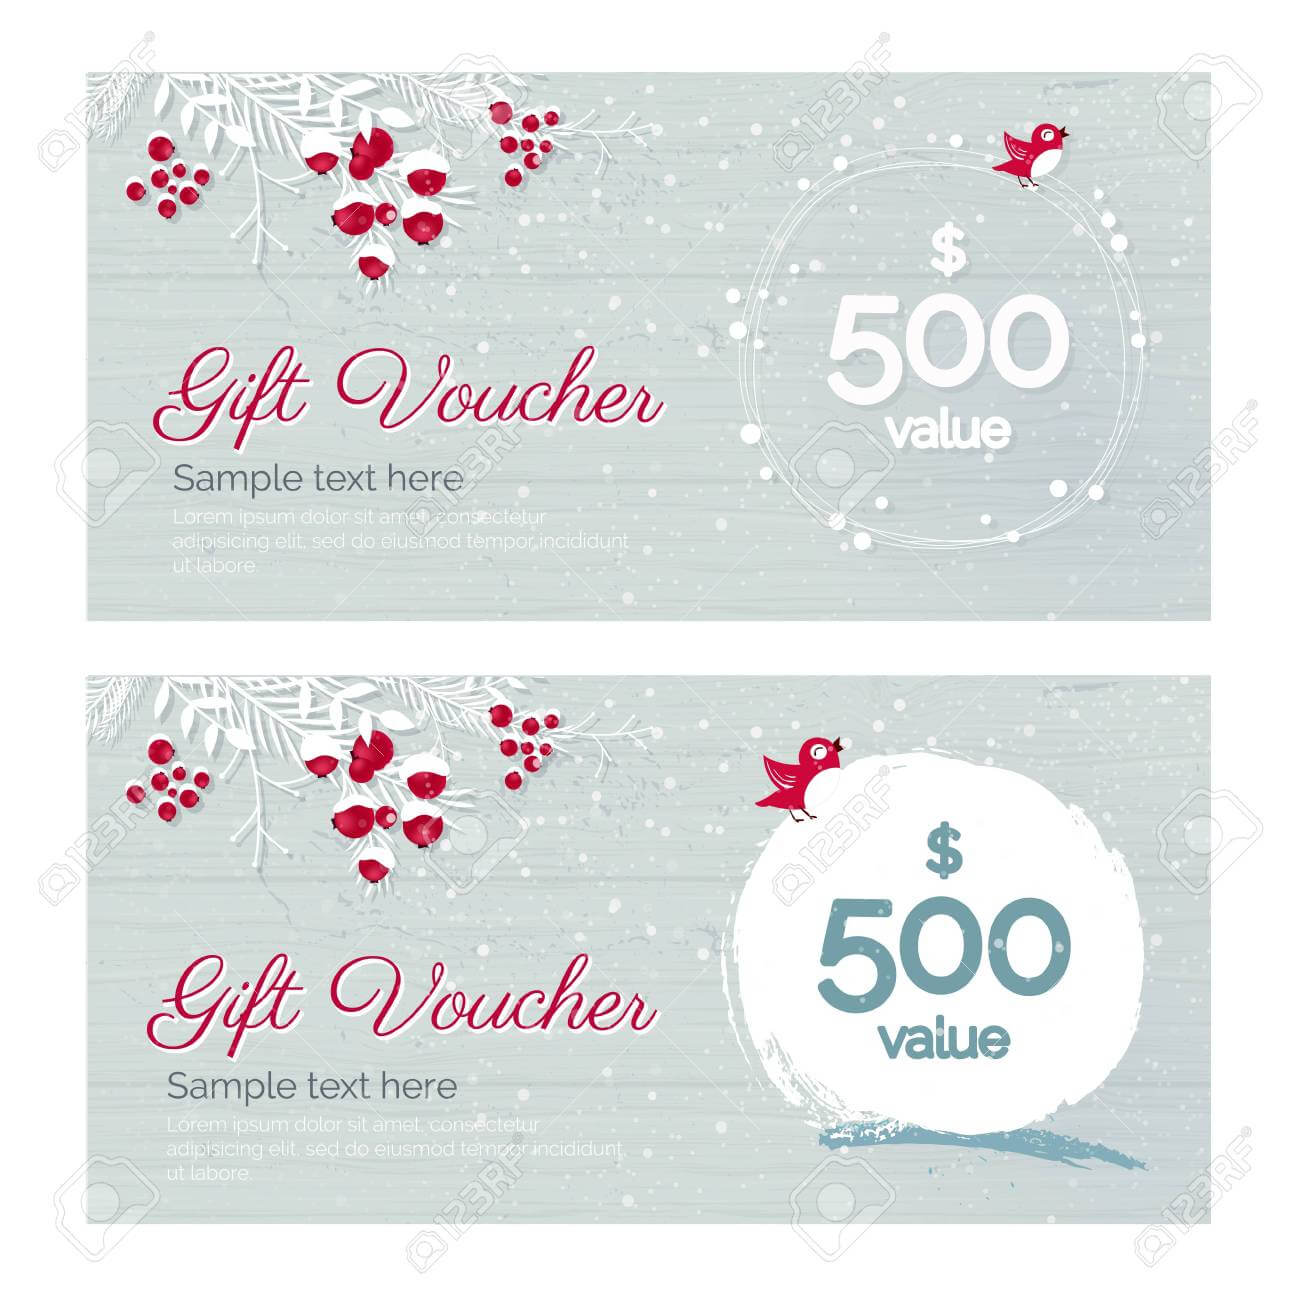 Holiday Gift Voucher Template